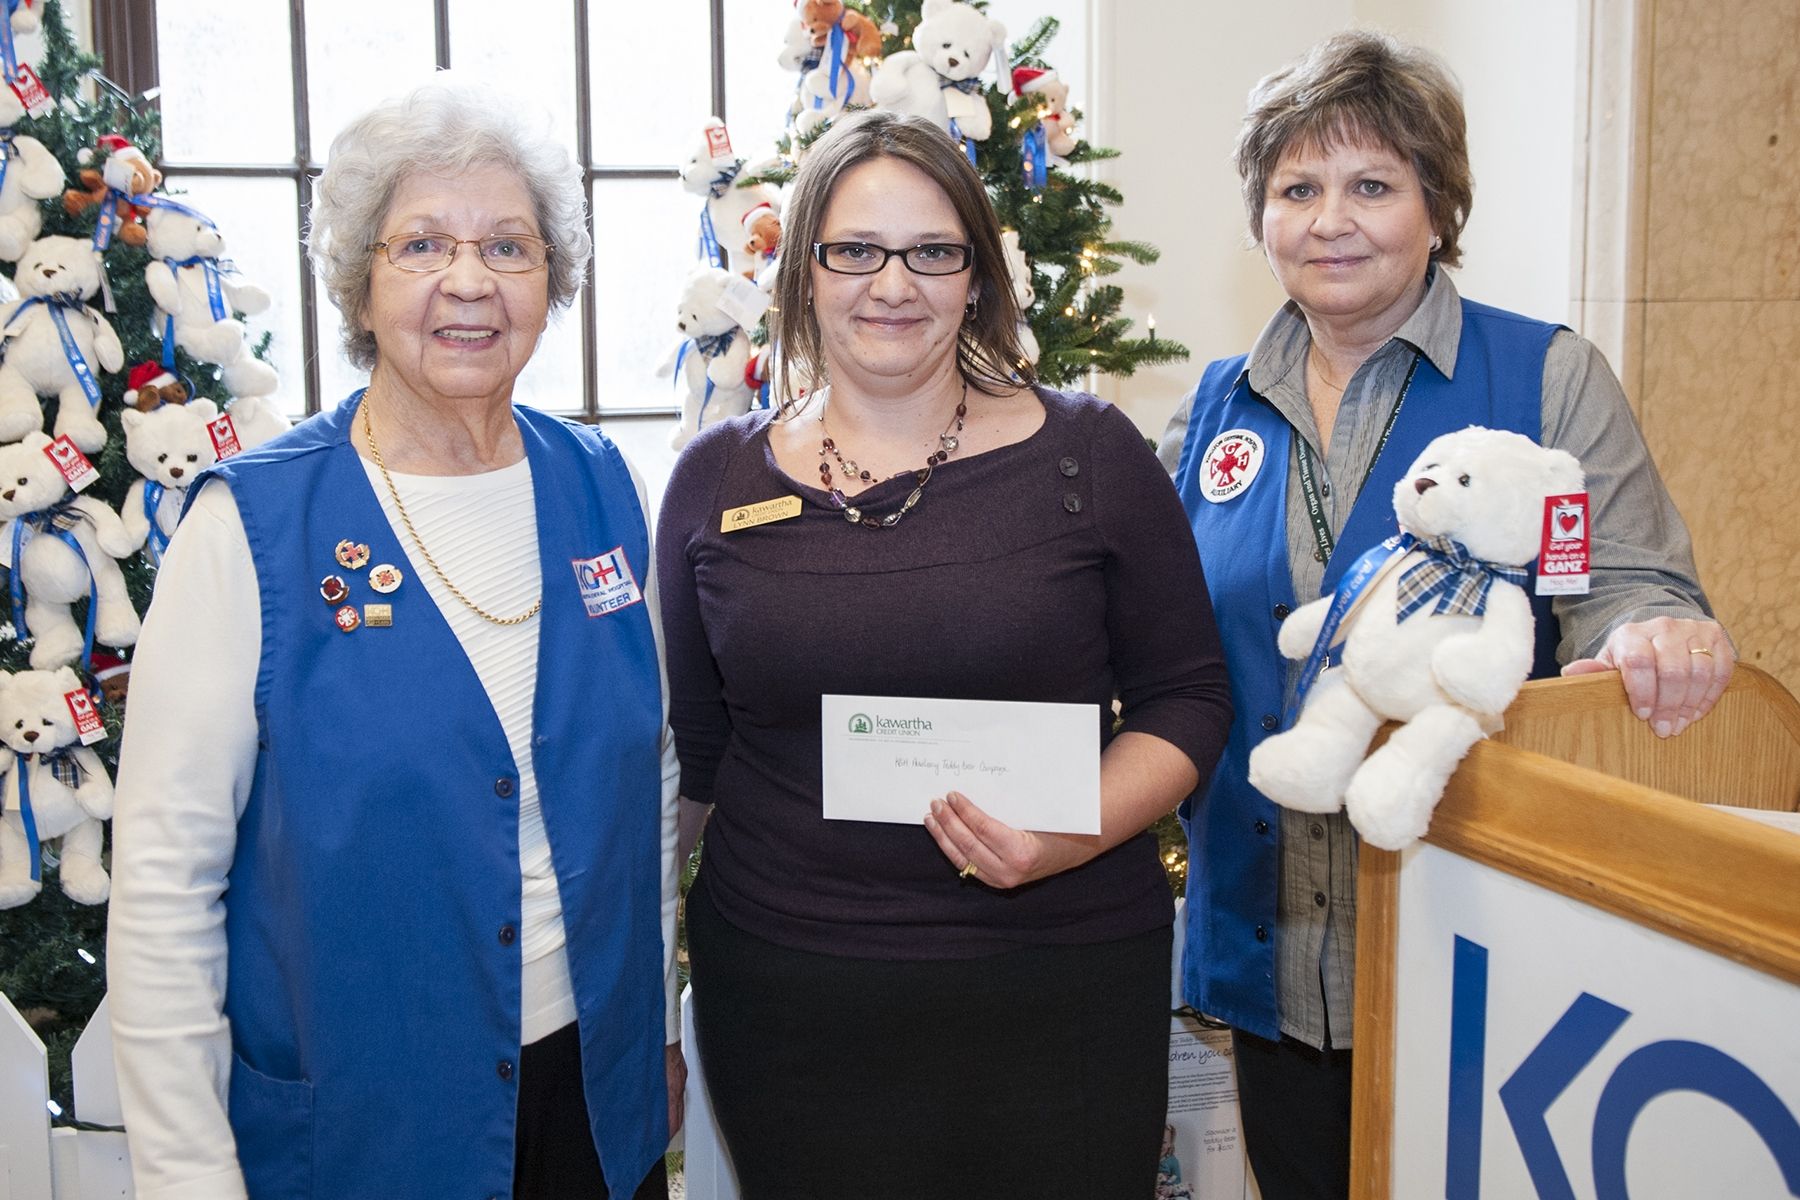 Lynn Brown from Kawartha Credit Union in Kingston presents a cheque to KGH Auxiliary campaign organizers during the kick off event.